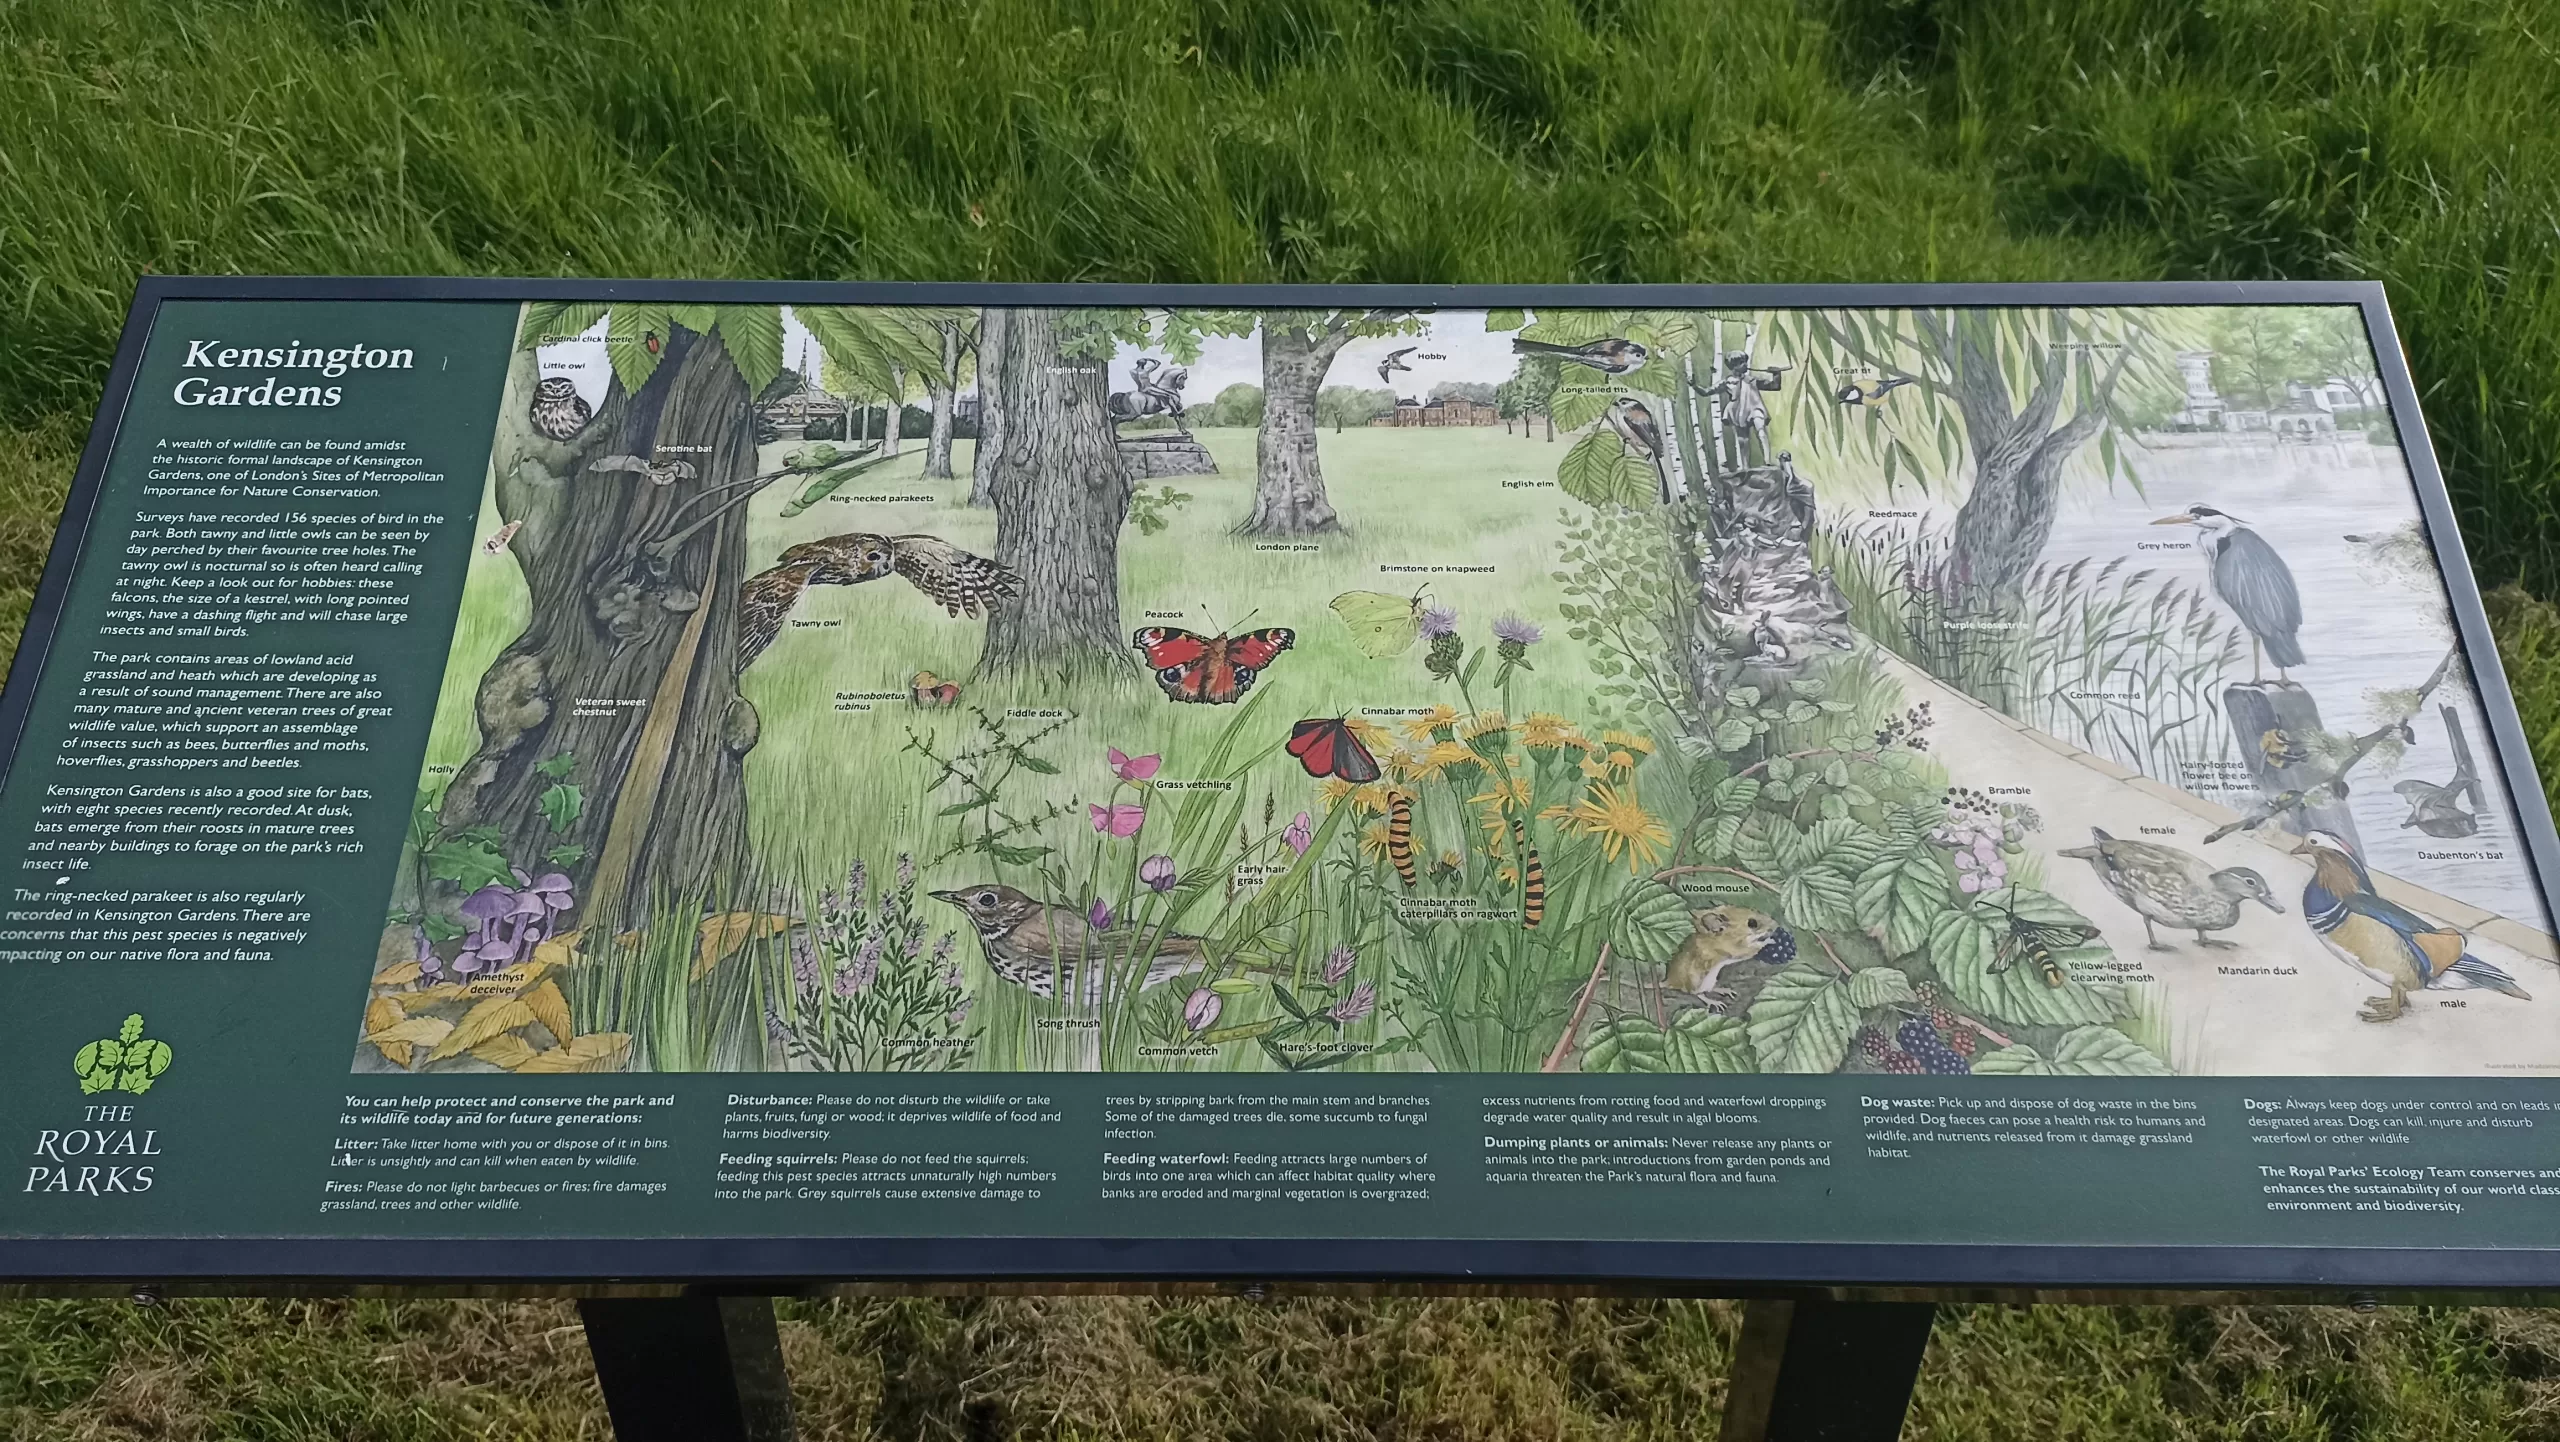 A sign depicting the wildlife found in Kensington Gardens, London